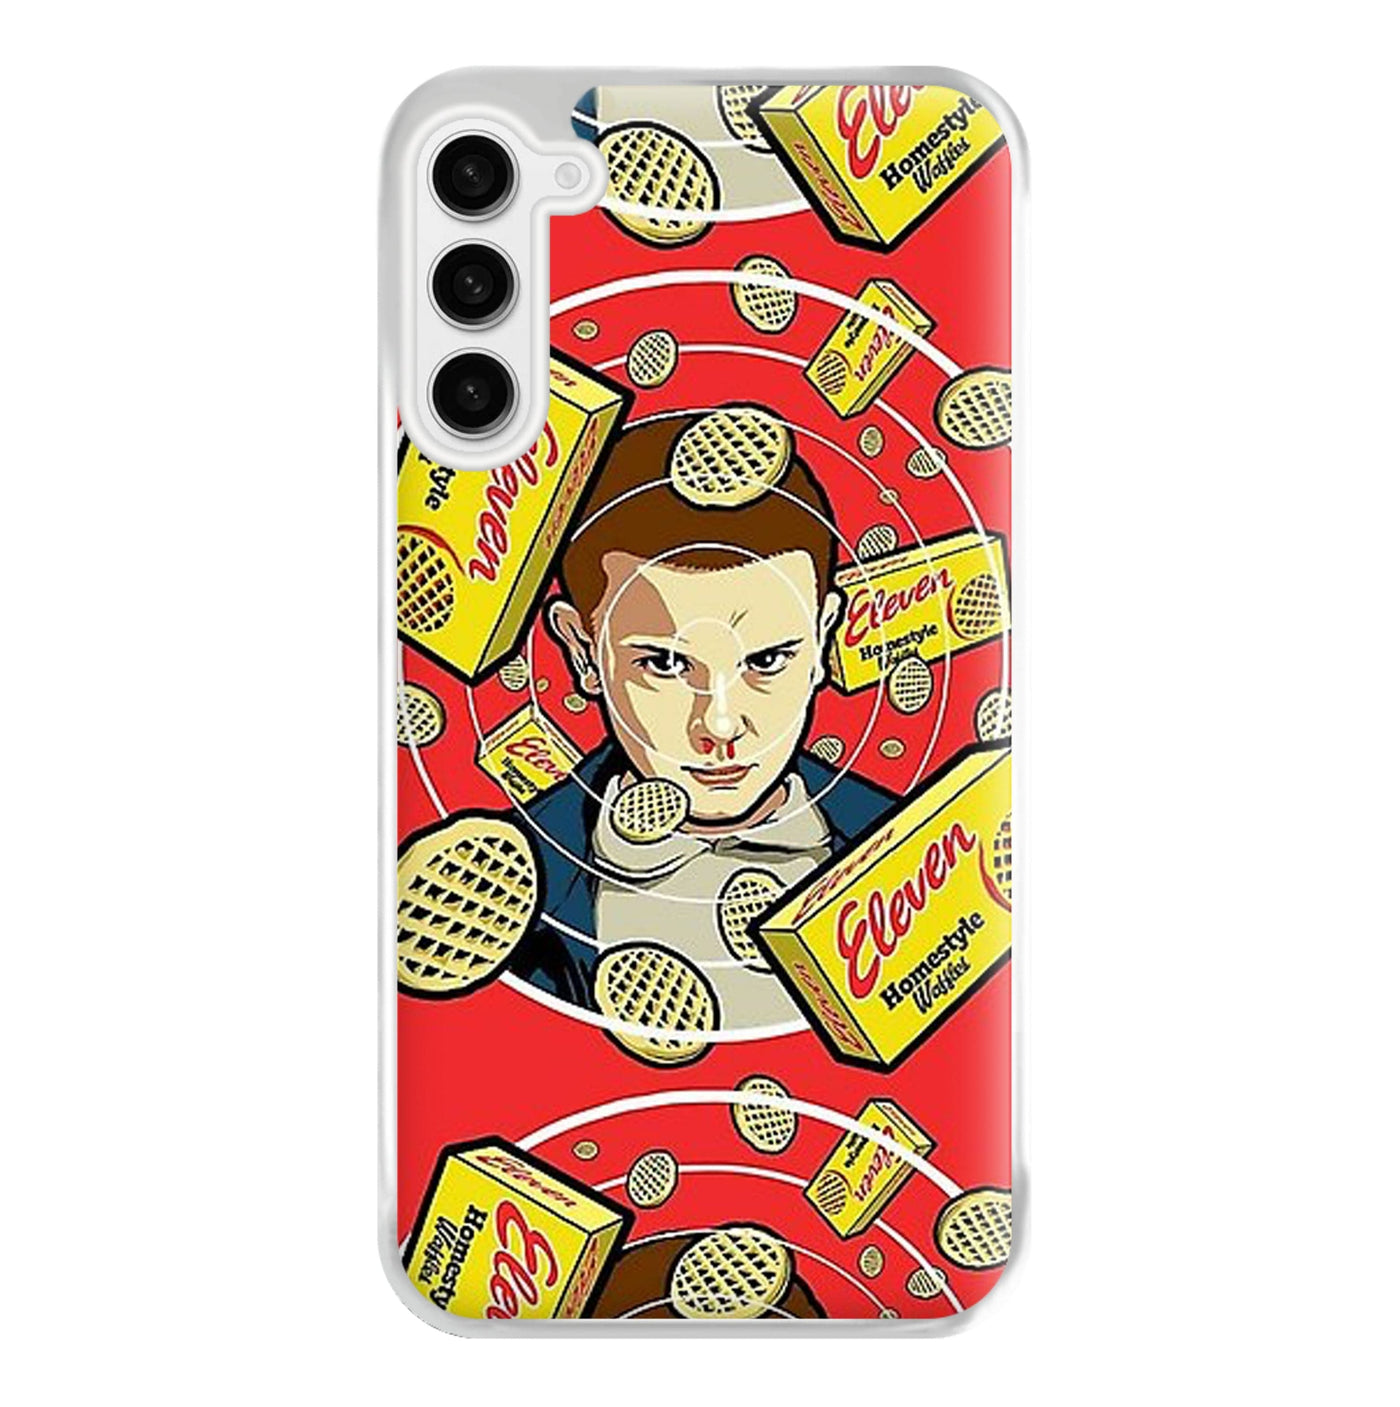 Eleven and Waffles - Stranger Things Phone Case